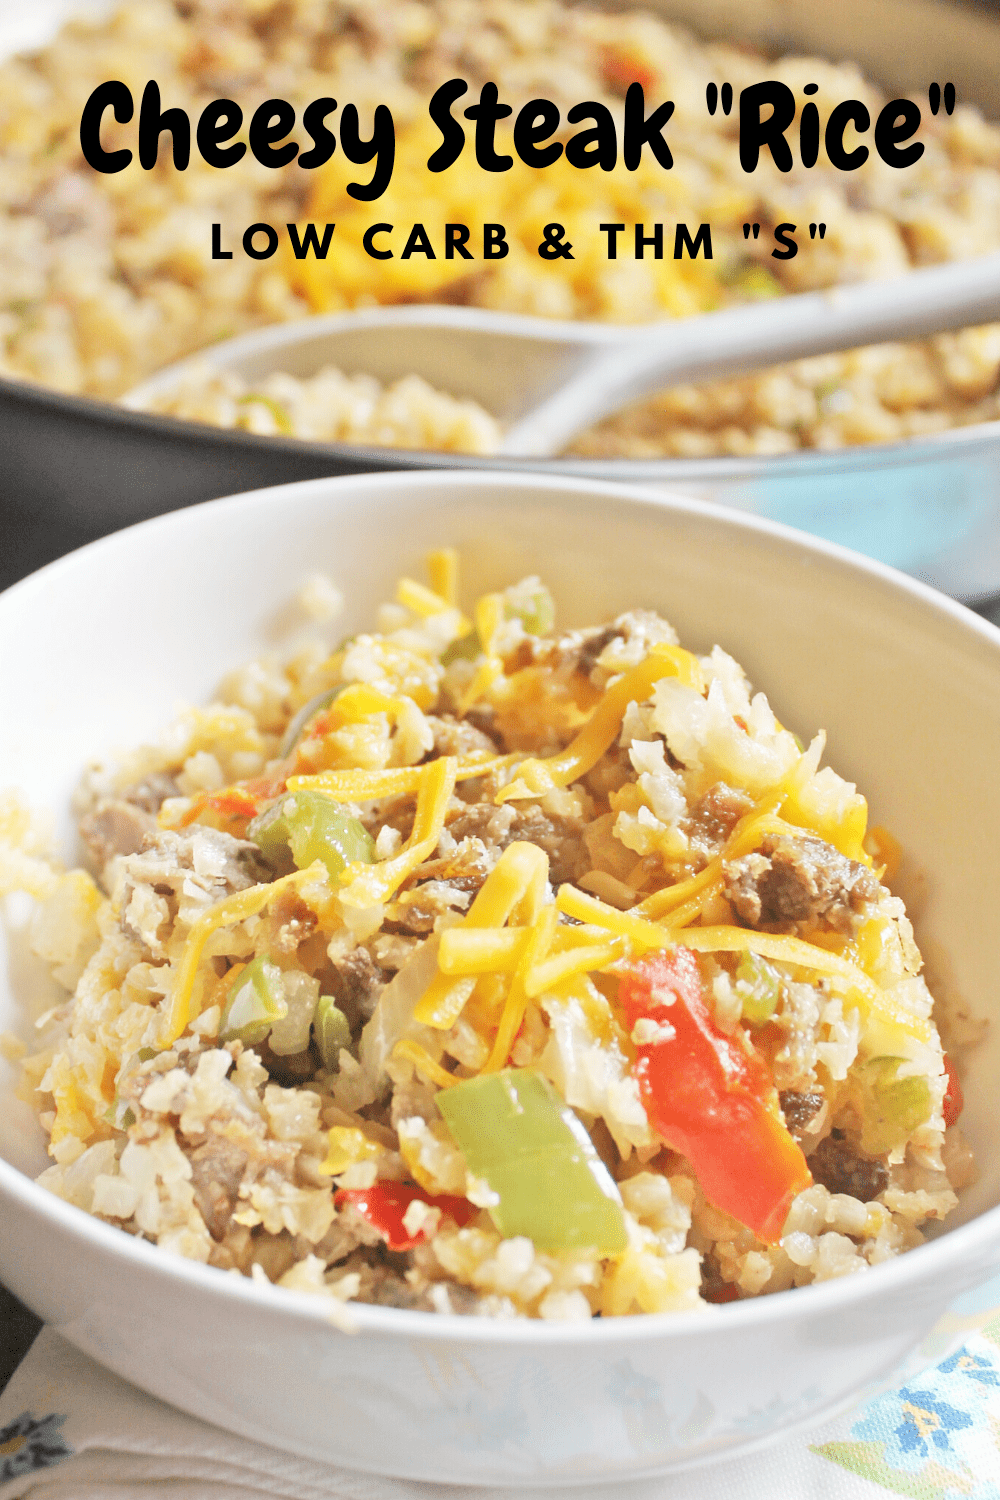 Cheesy Steak "Rice" is a low carb and THM skillet meal that features cauliflower rice loaded with steak, onions and peppers and cheese. 